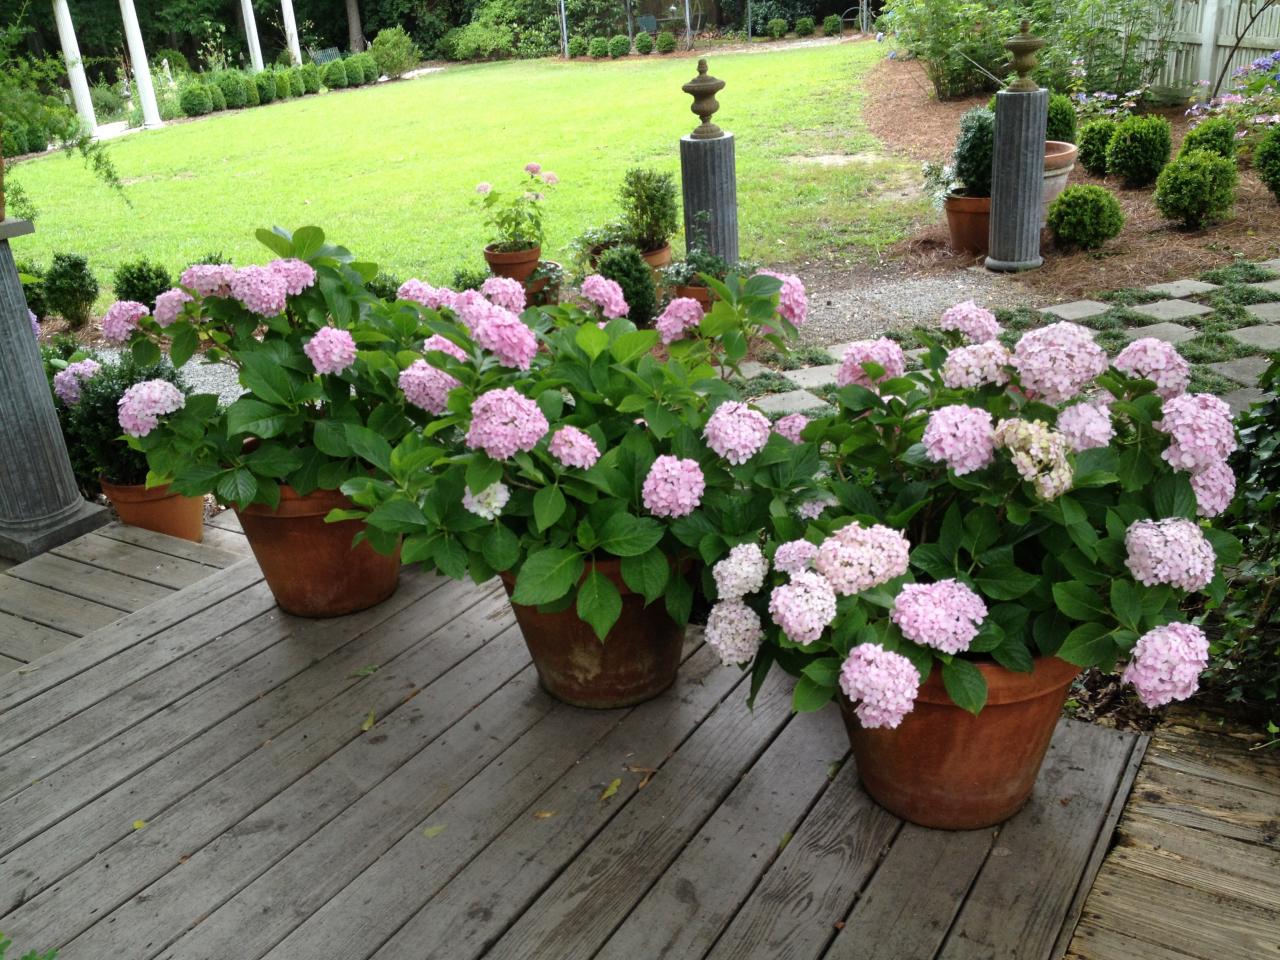 Water Hydrangeas According to the Conditions